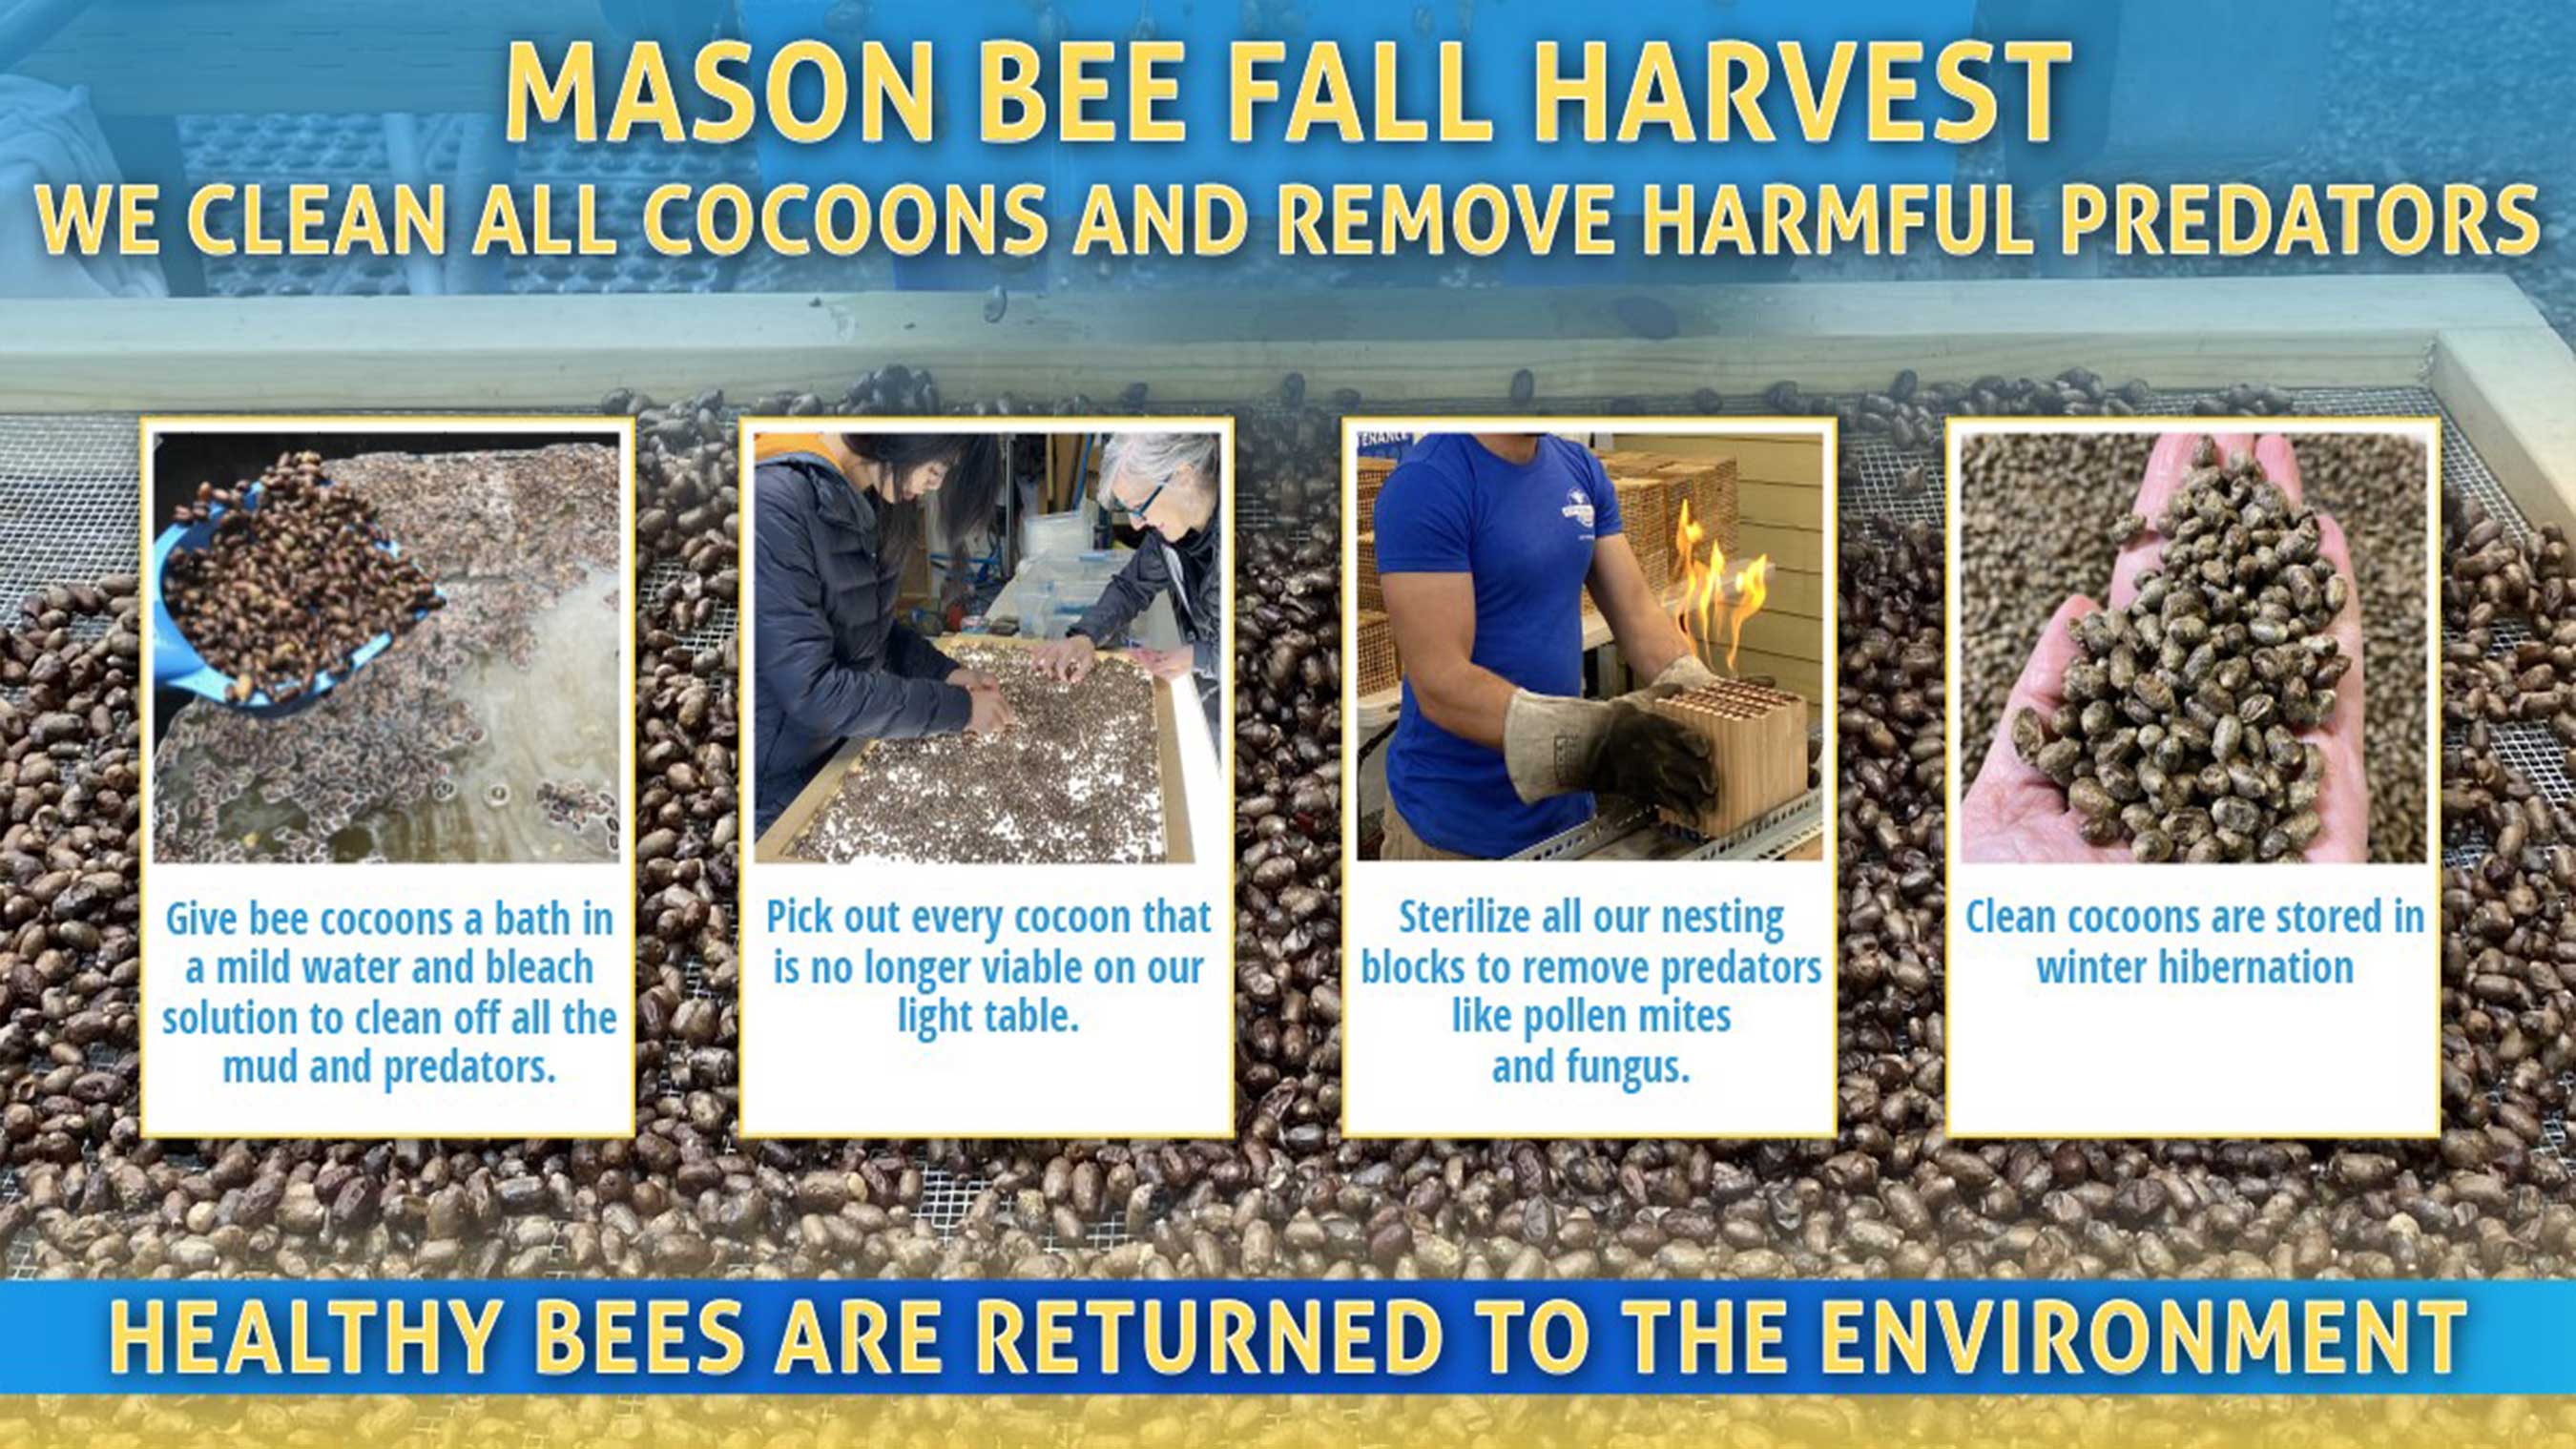 Watch how we clean millions of mason bee cocoons.